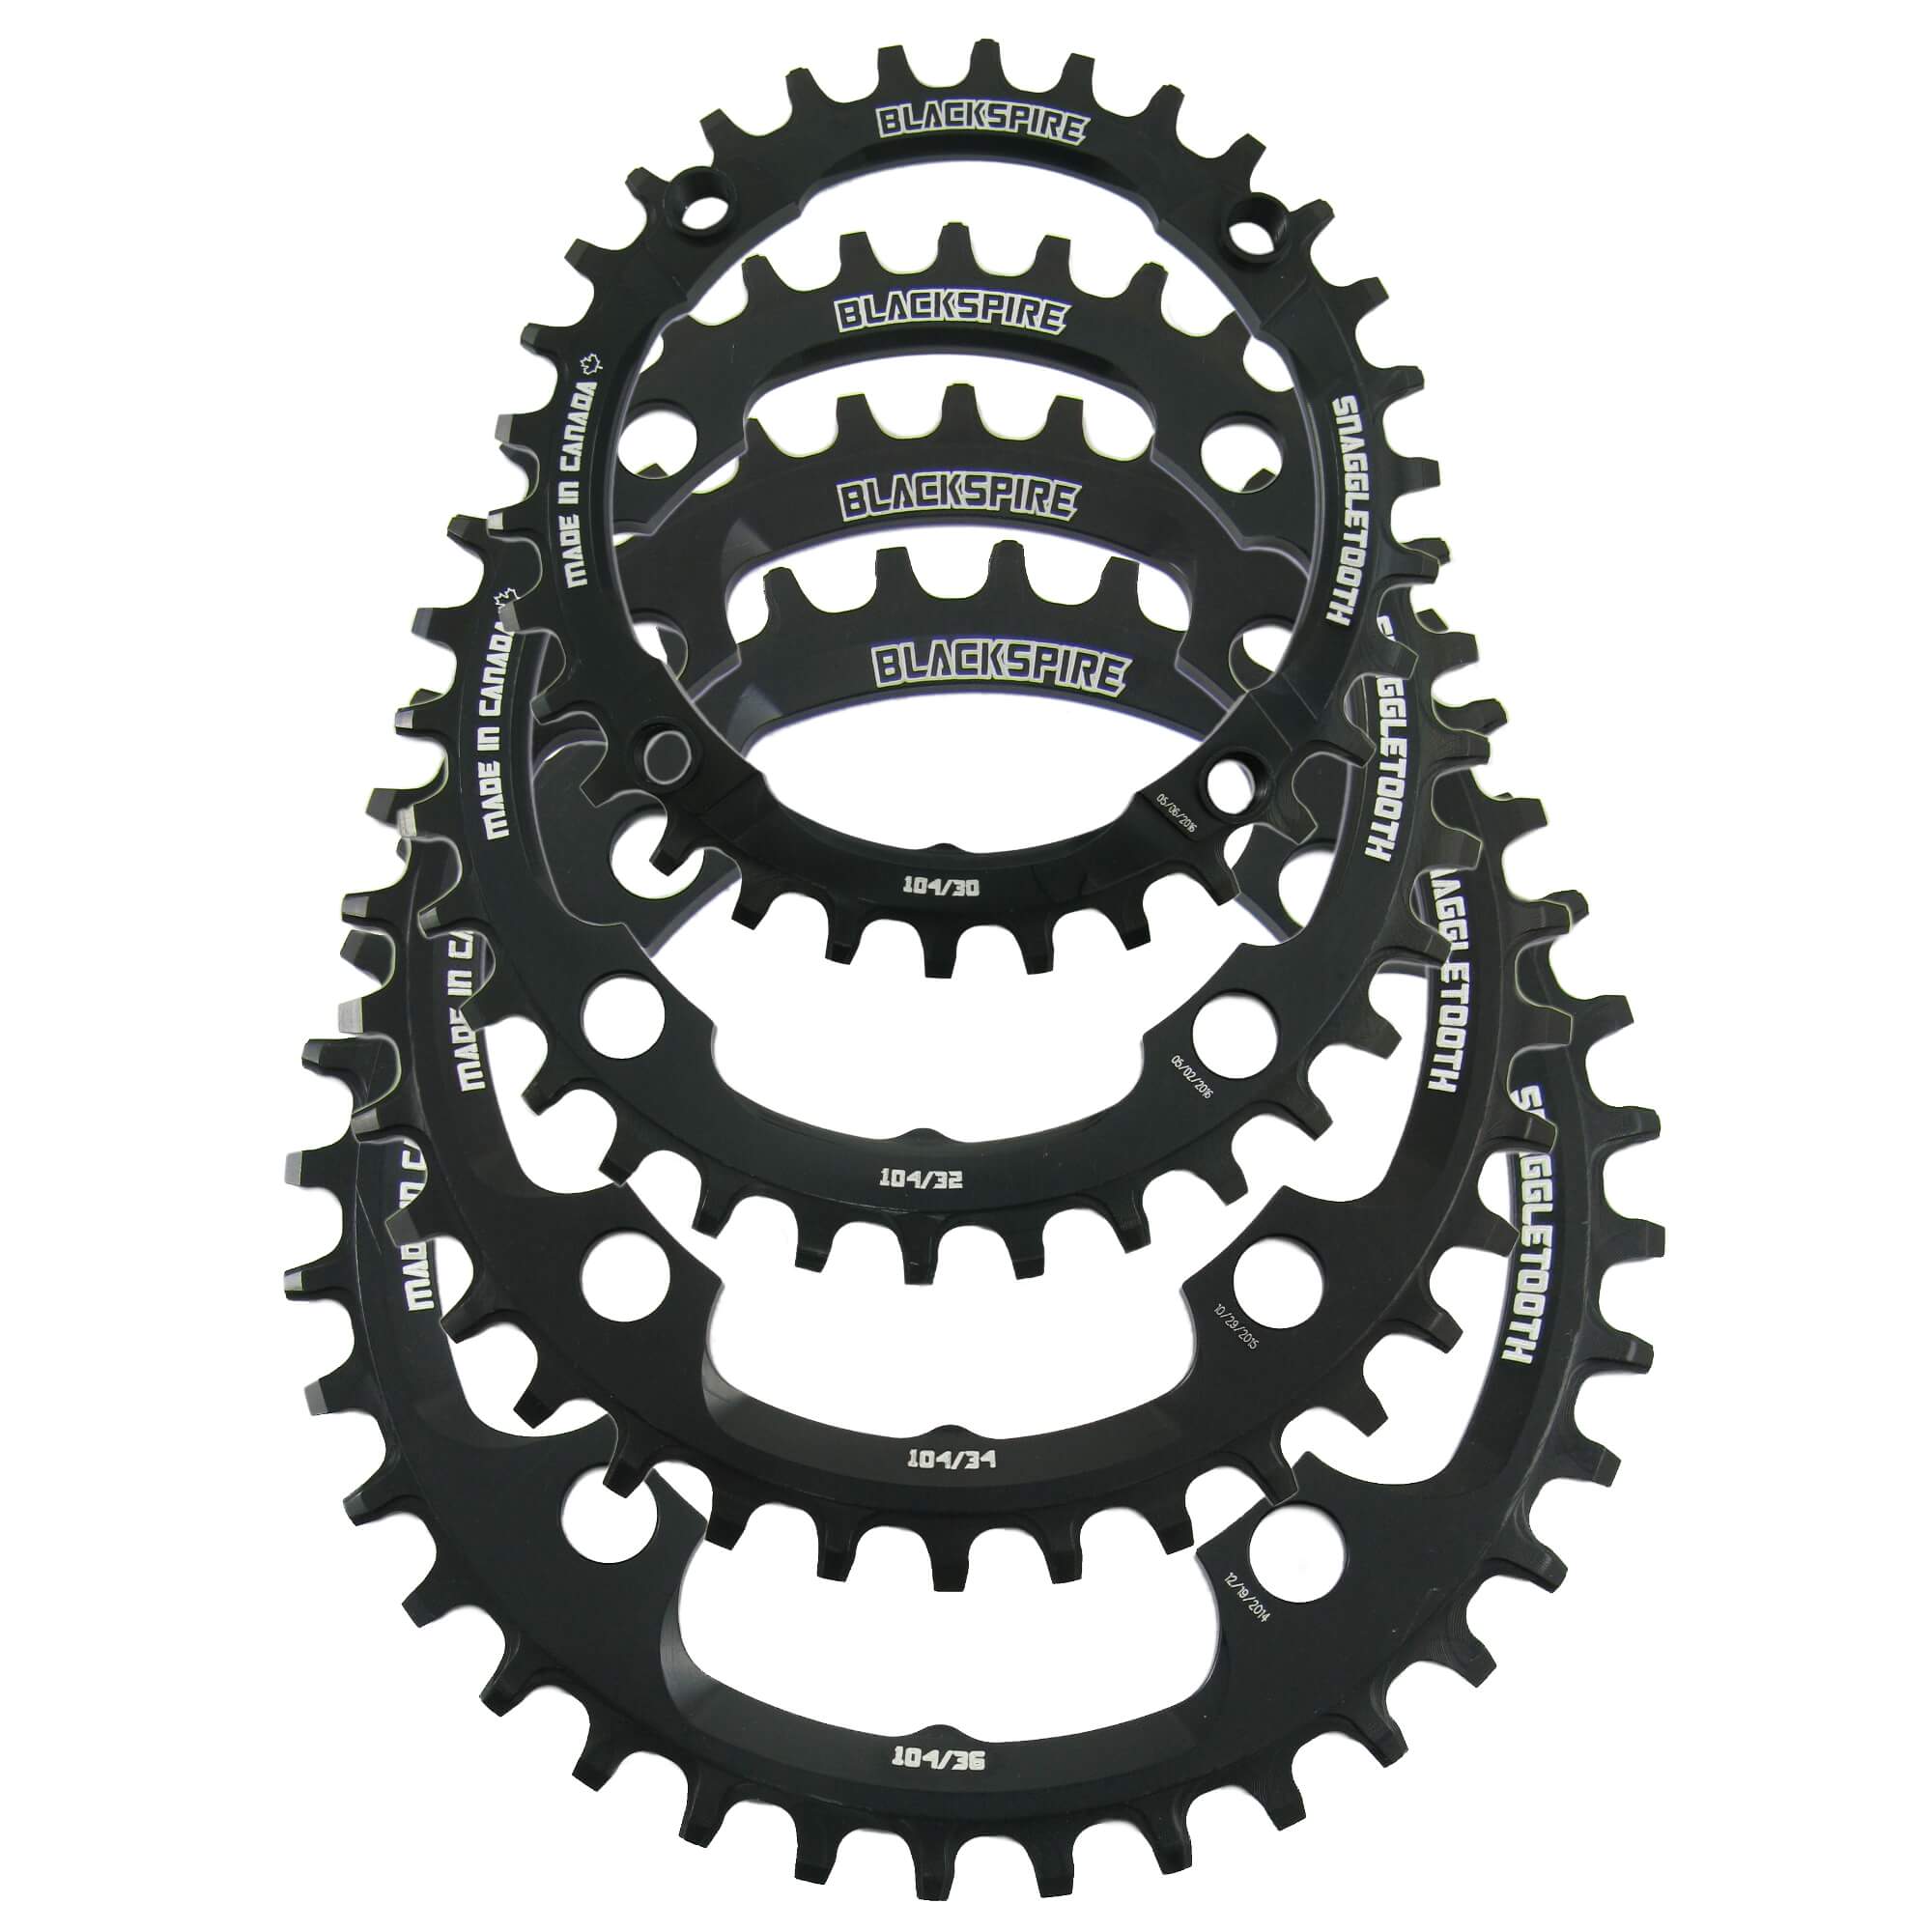 Blackspire Snaggletooth Narrow Wide 104mm BCD Chainring - TheBikesmiths